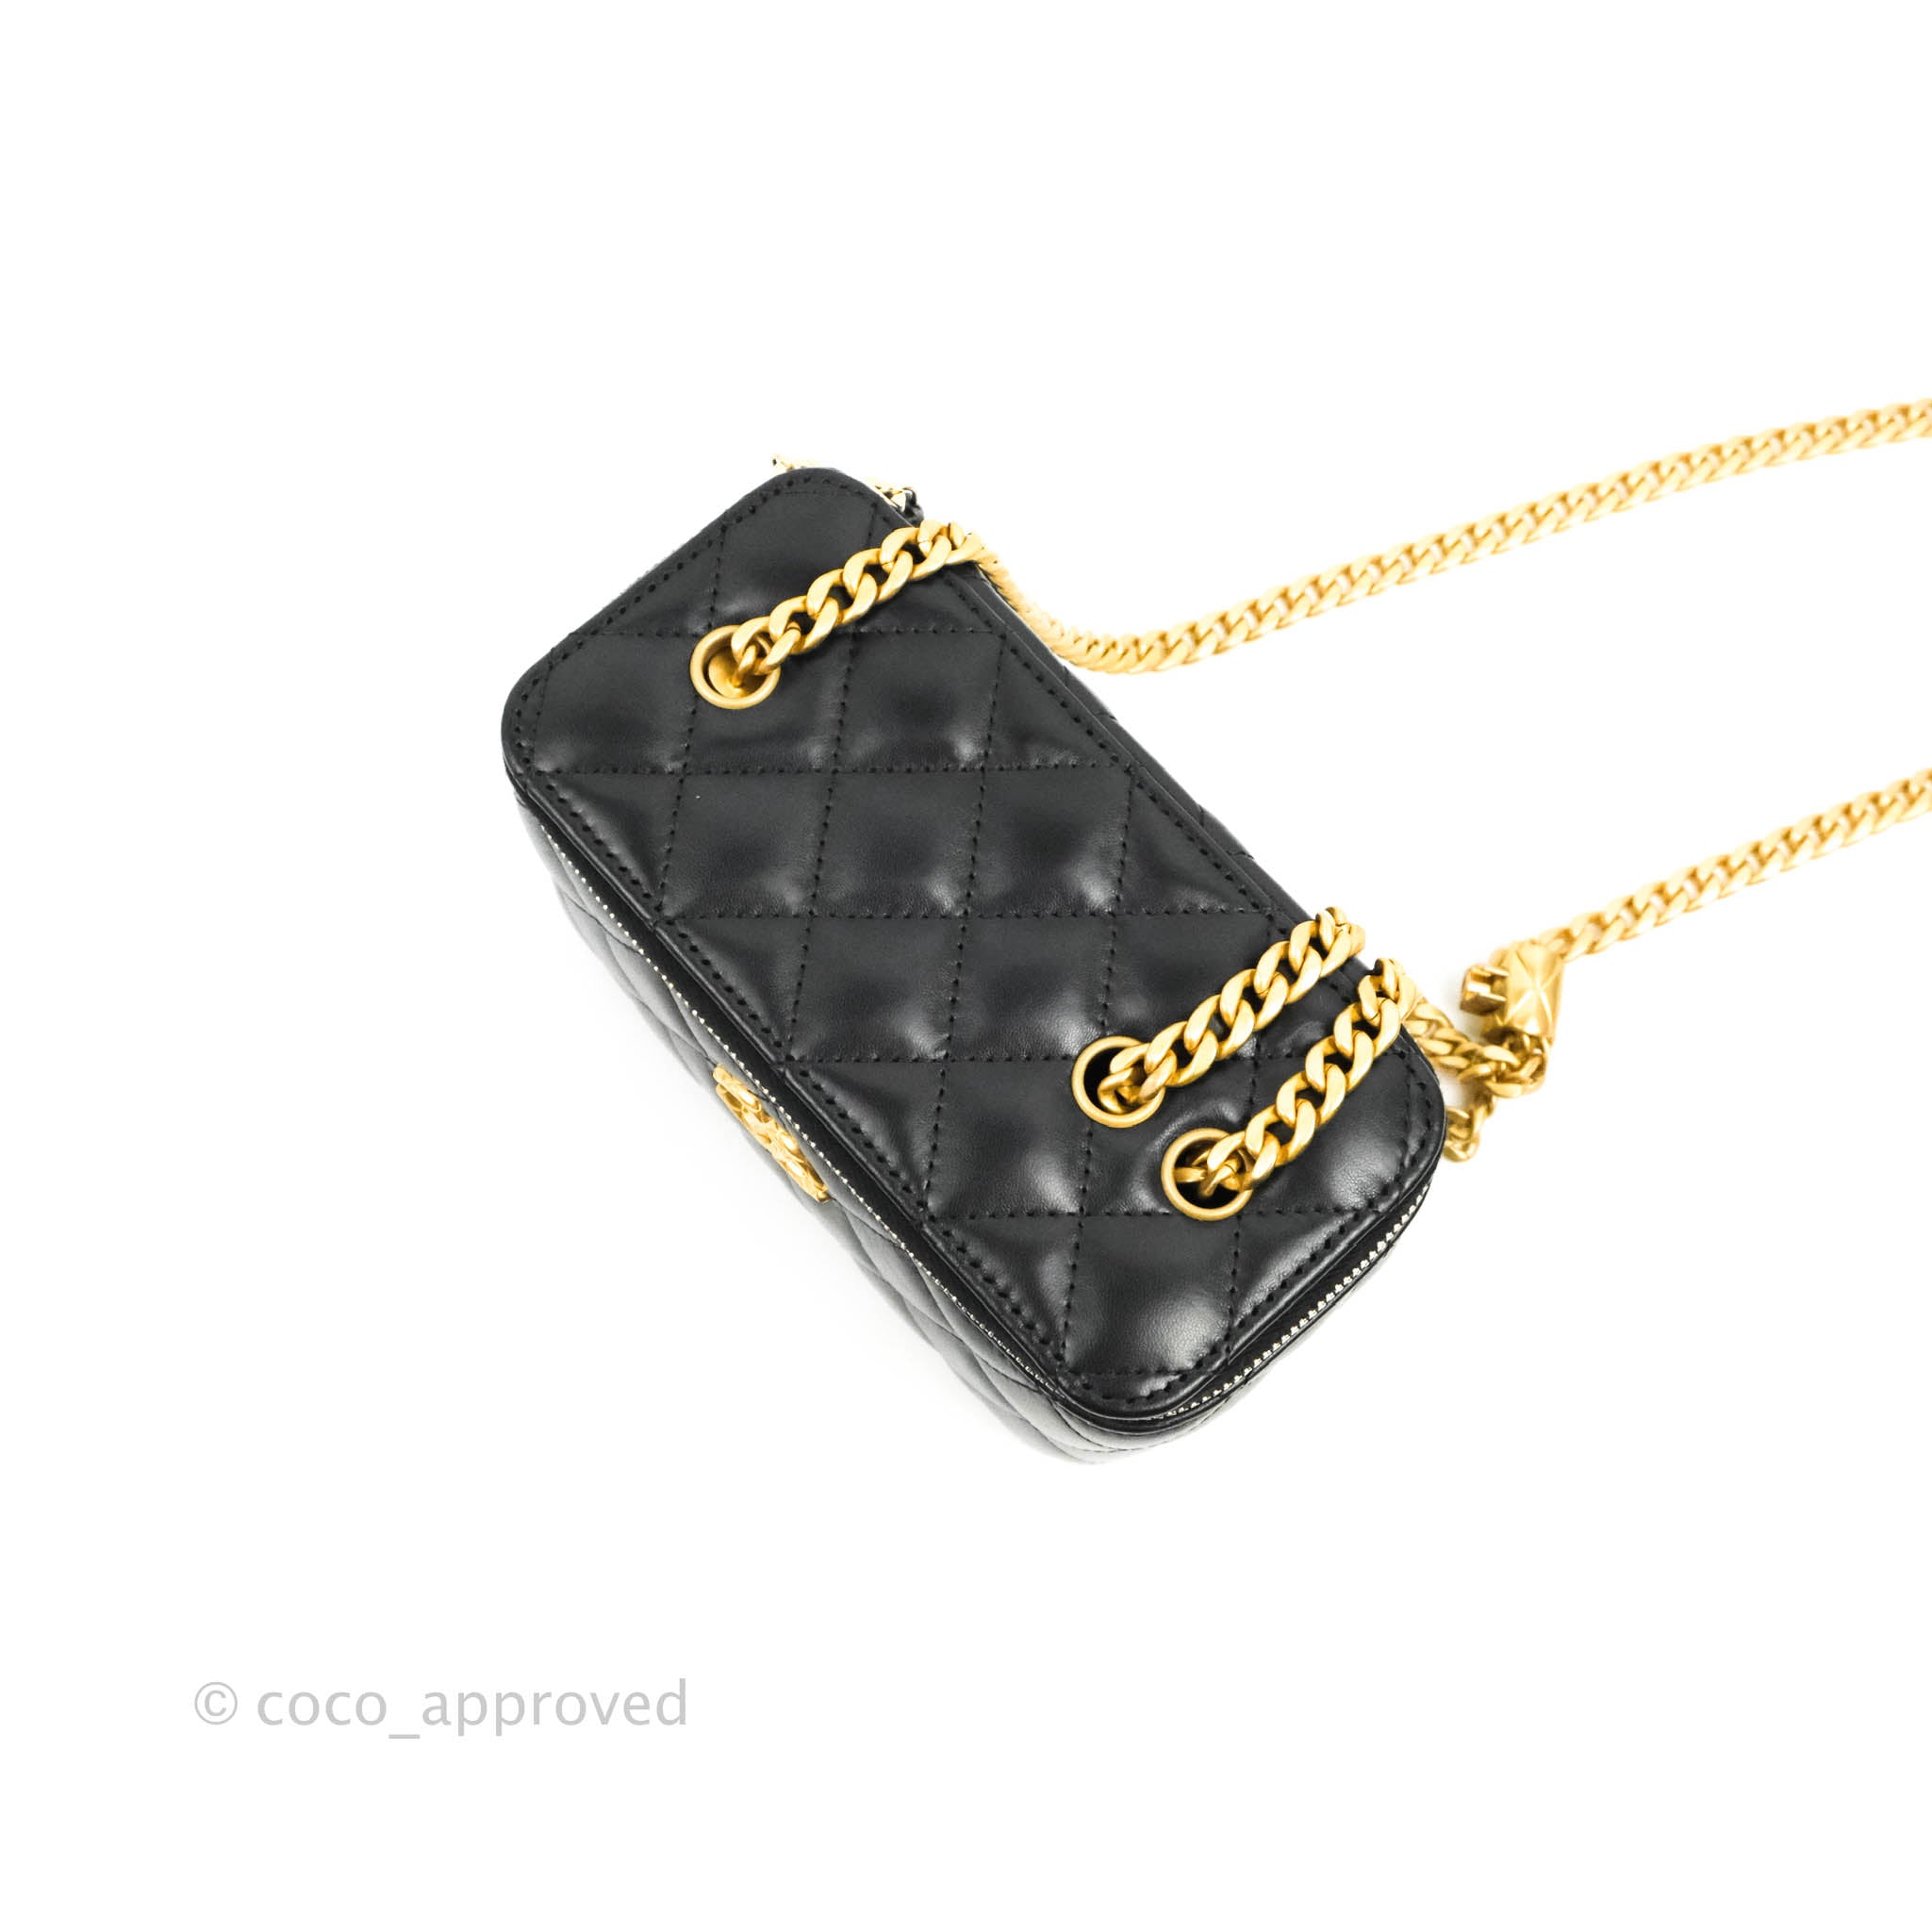 New CHANEL 22K Vanity Clutch COCO Gold CHAIN Black Quilted